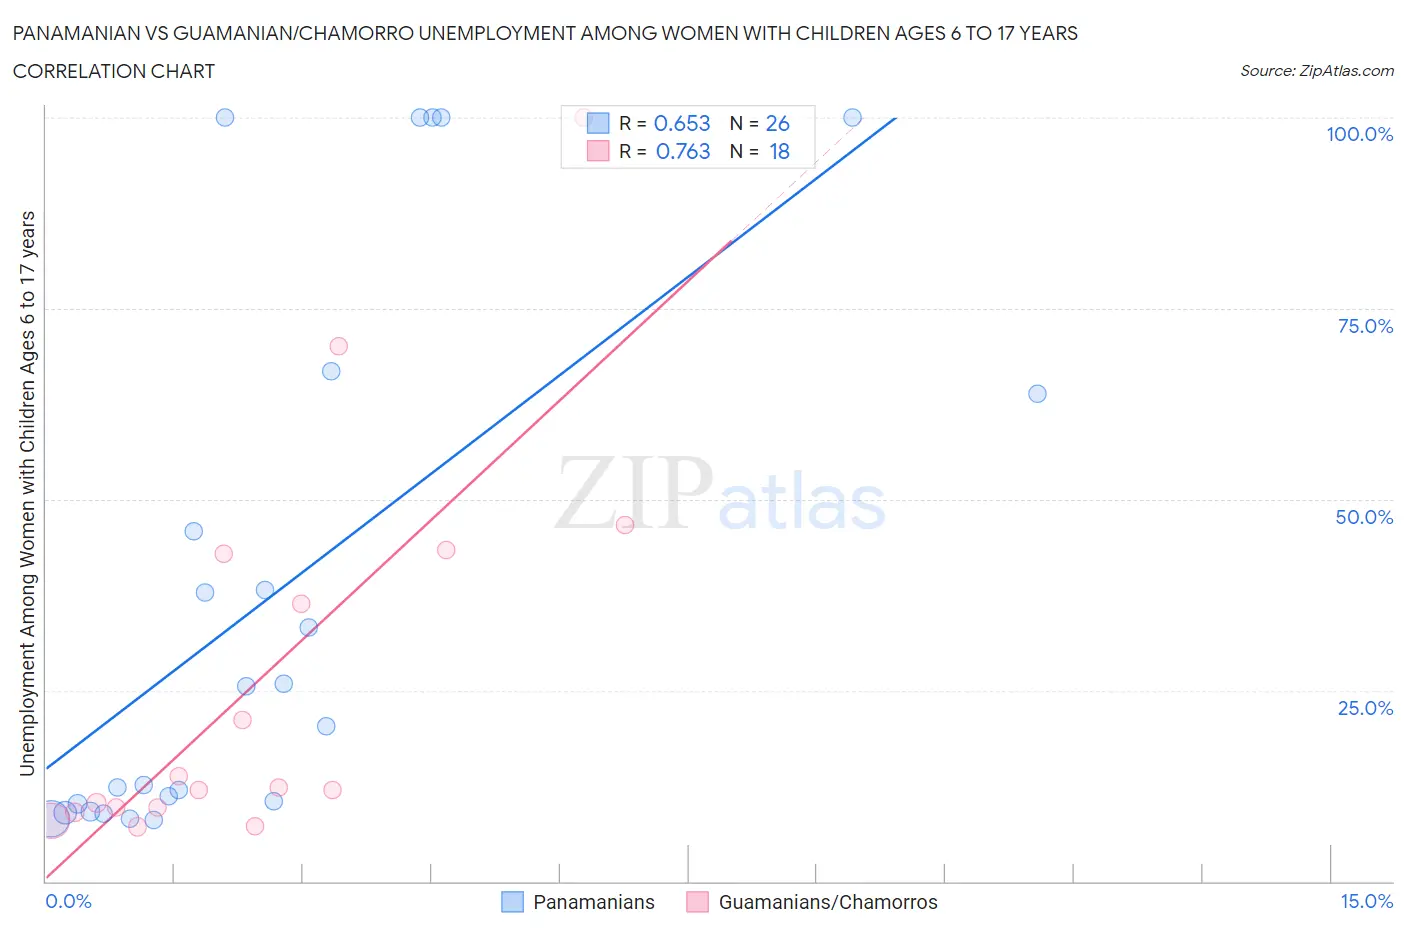 Panamanian vs Guamanian/Chamorro Unemployment Among Women with Children Ages 6 to 17 years